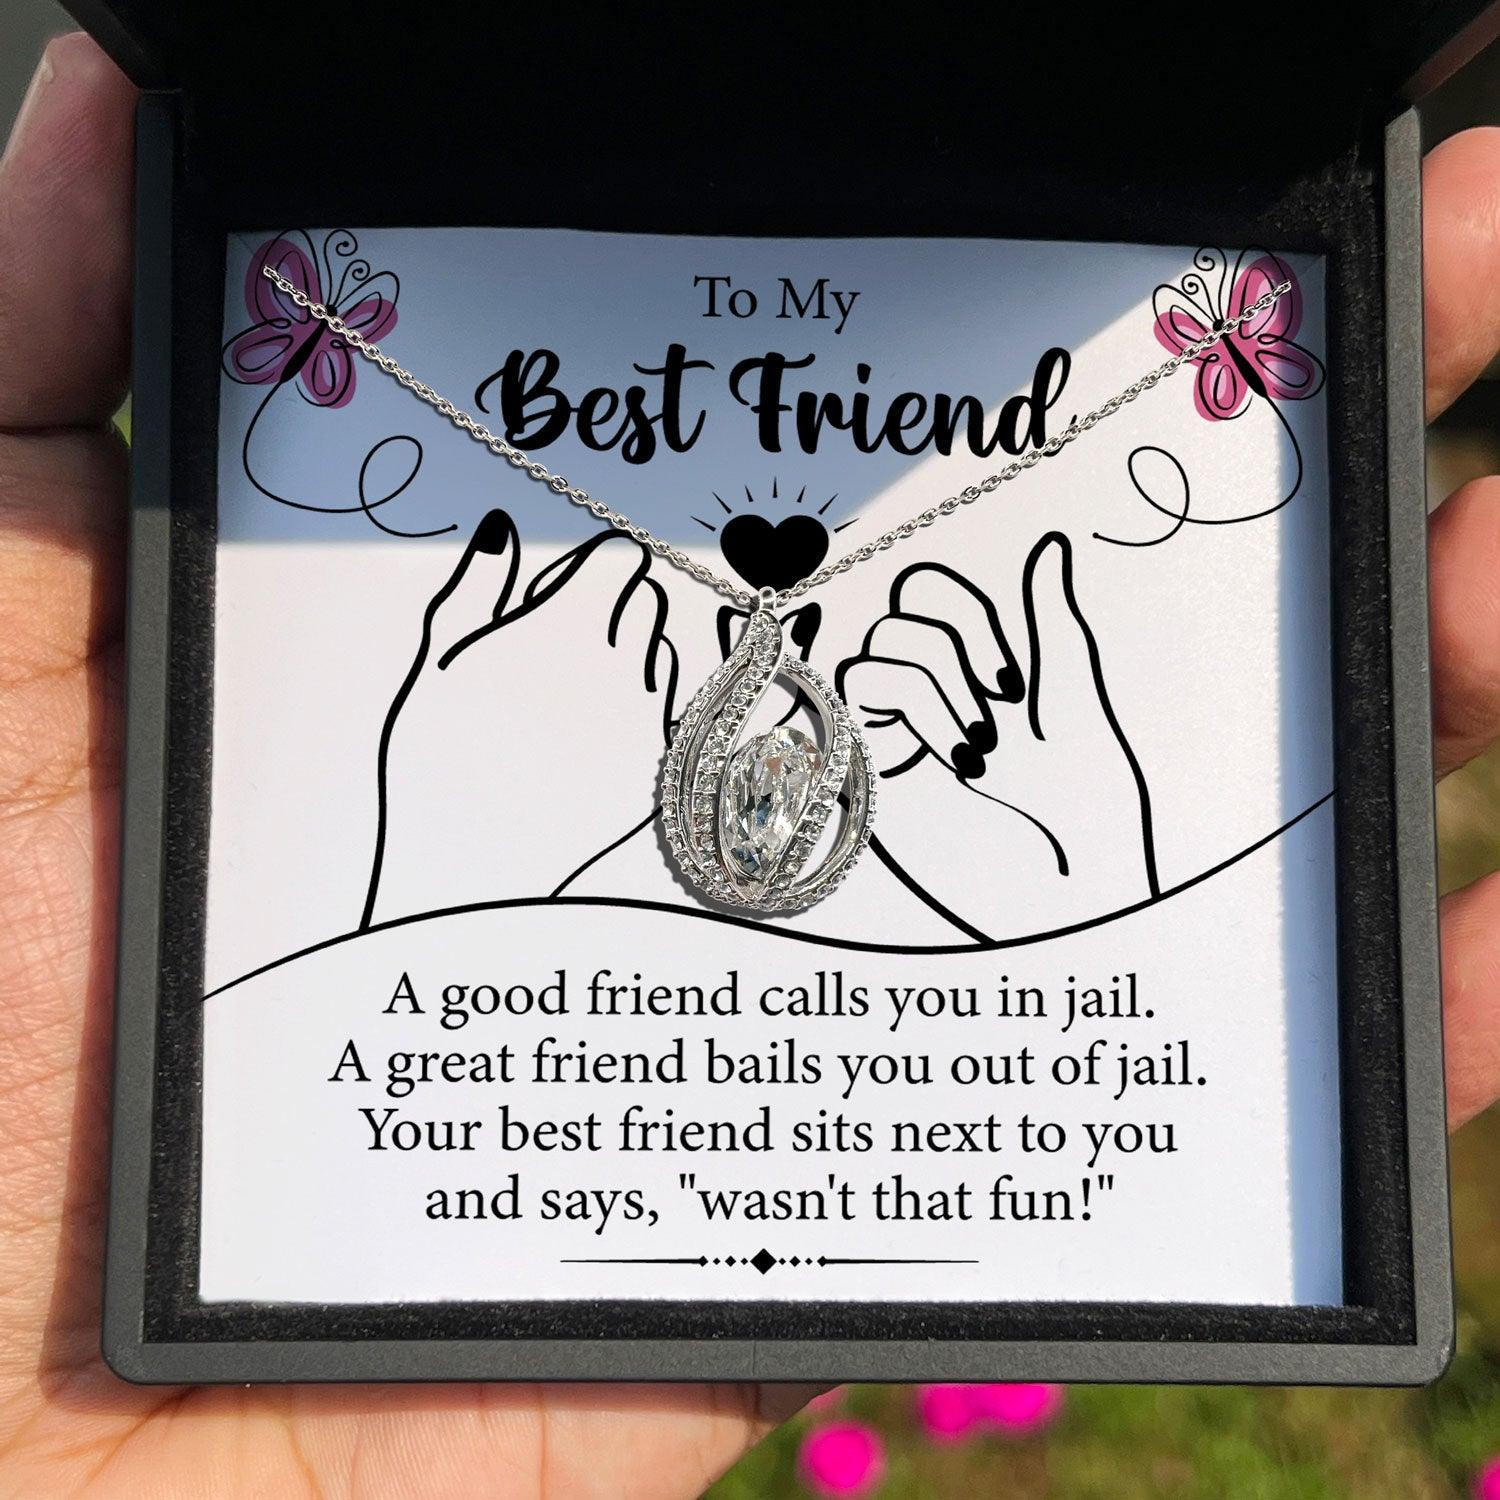 To My Best Friend - A Good Friend Calls You In Jail - Orbital Birdcage Necklace - TRYNDI